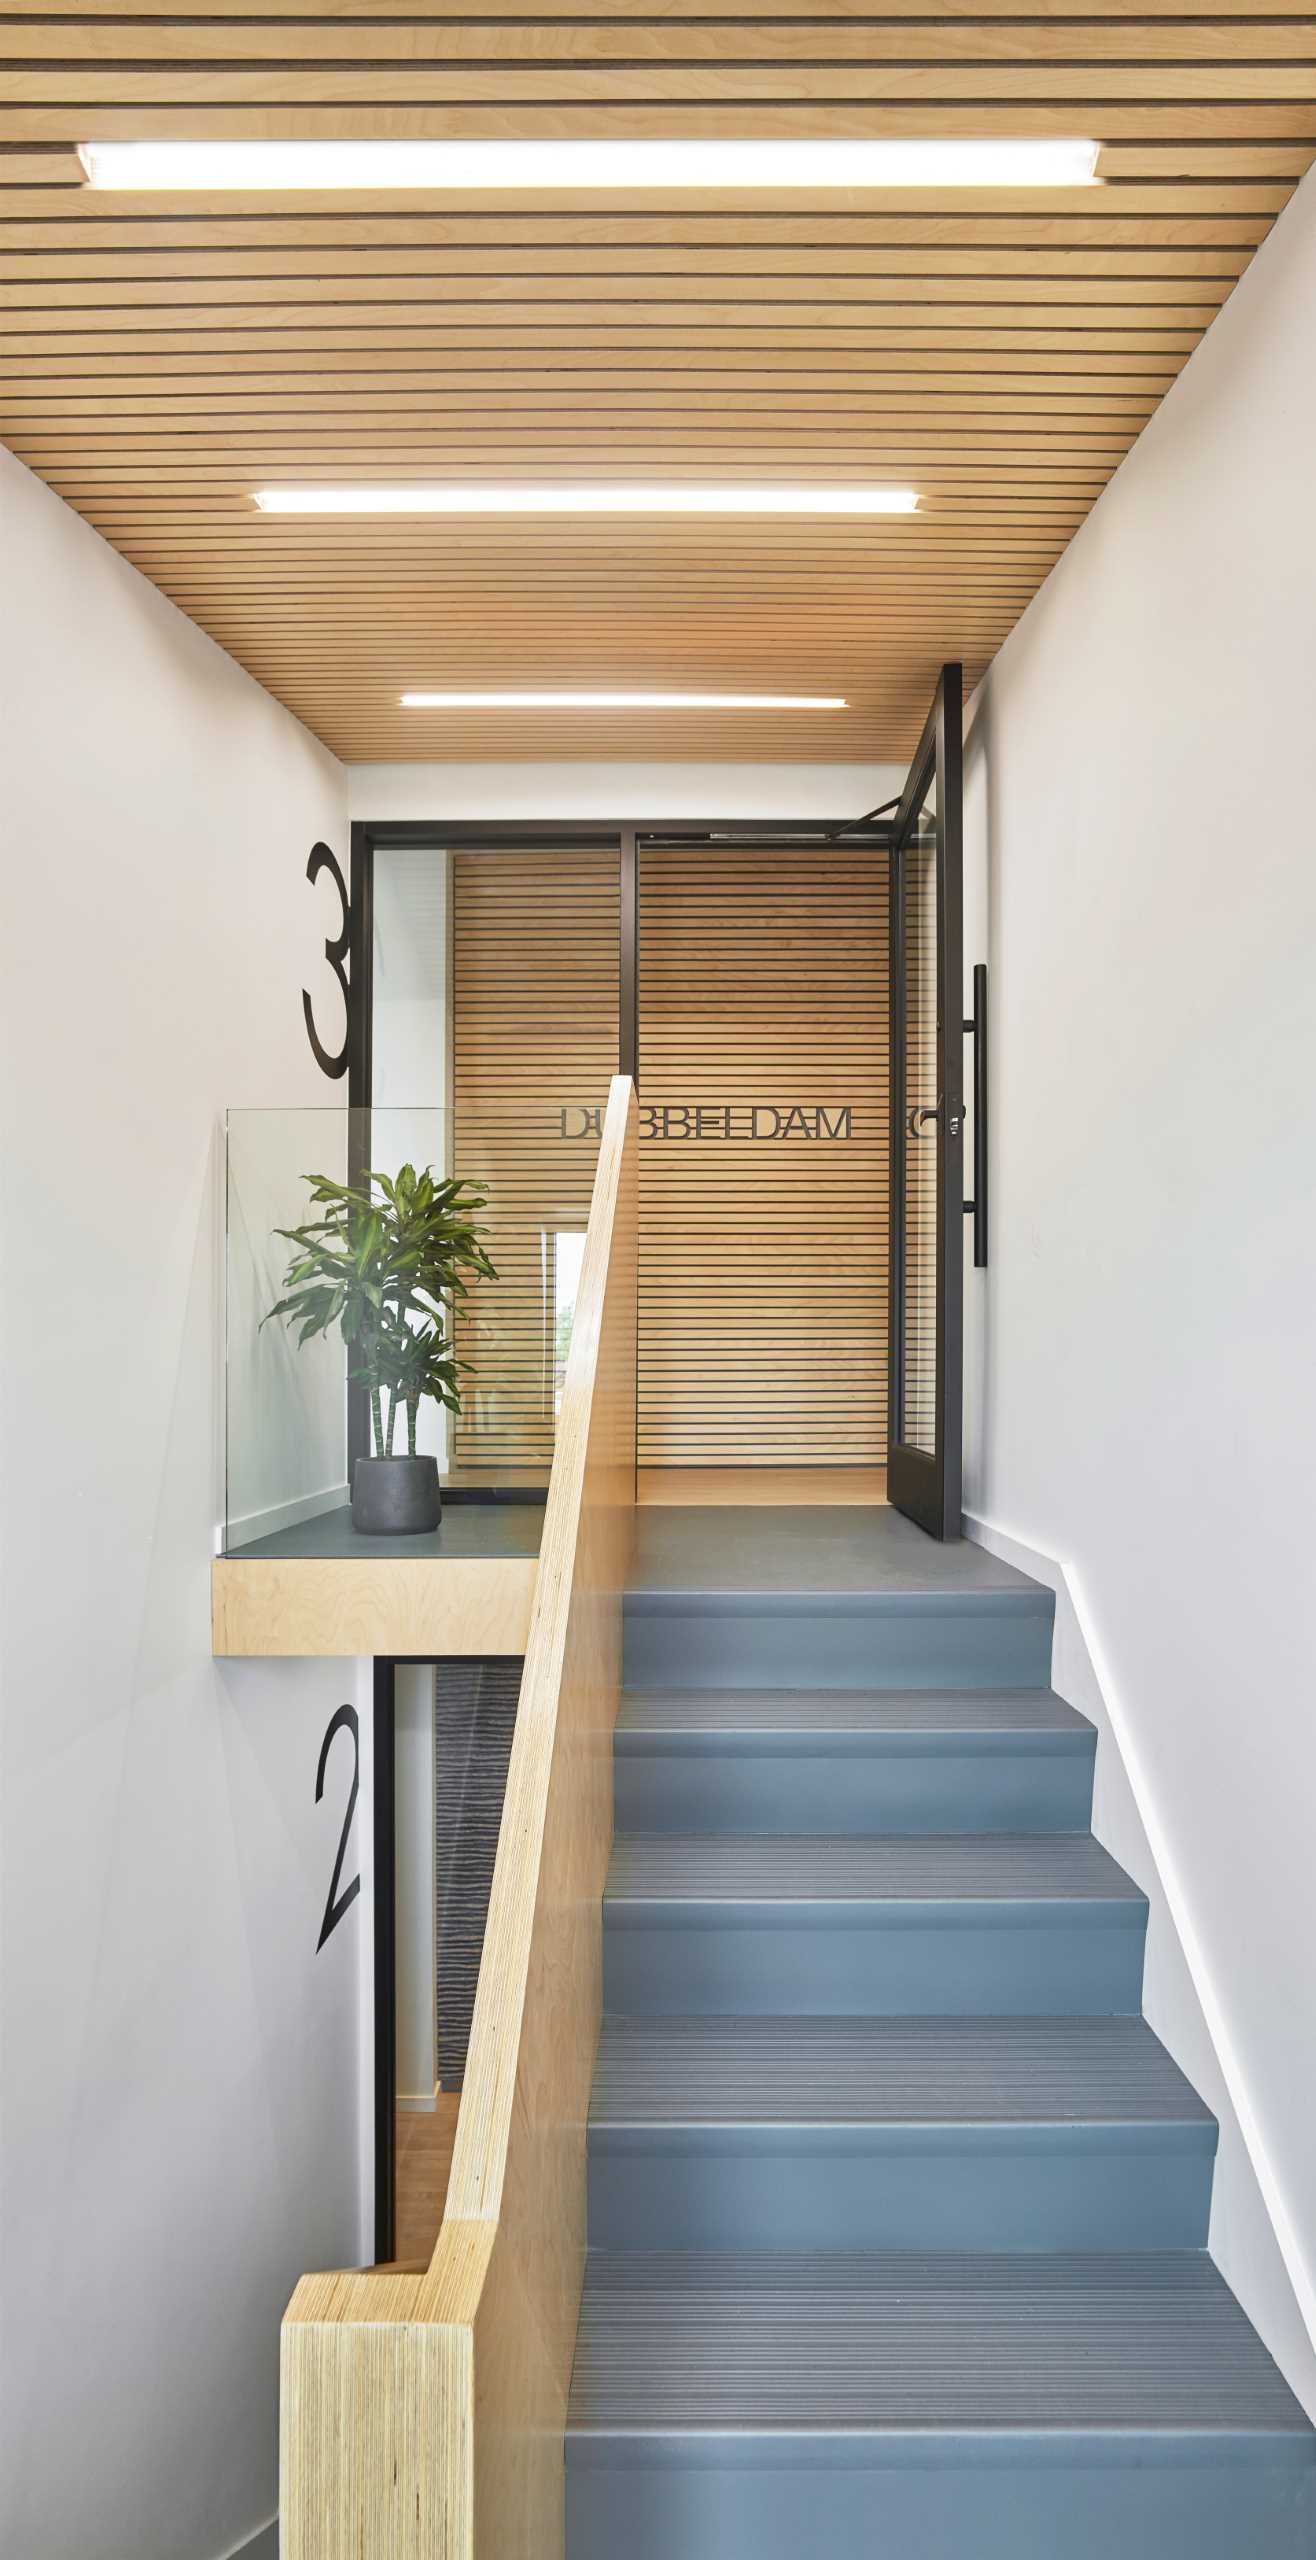 The central staircase thematically connects all floors in this office building with Baltic birch slats and graphic floor numbers that lead to Dubbeldam’s top-floor studio.